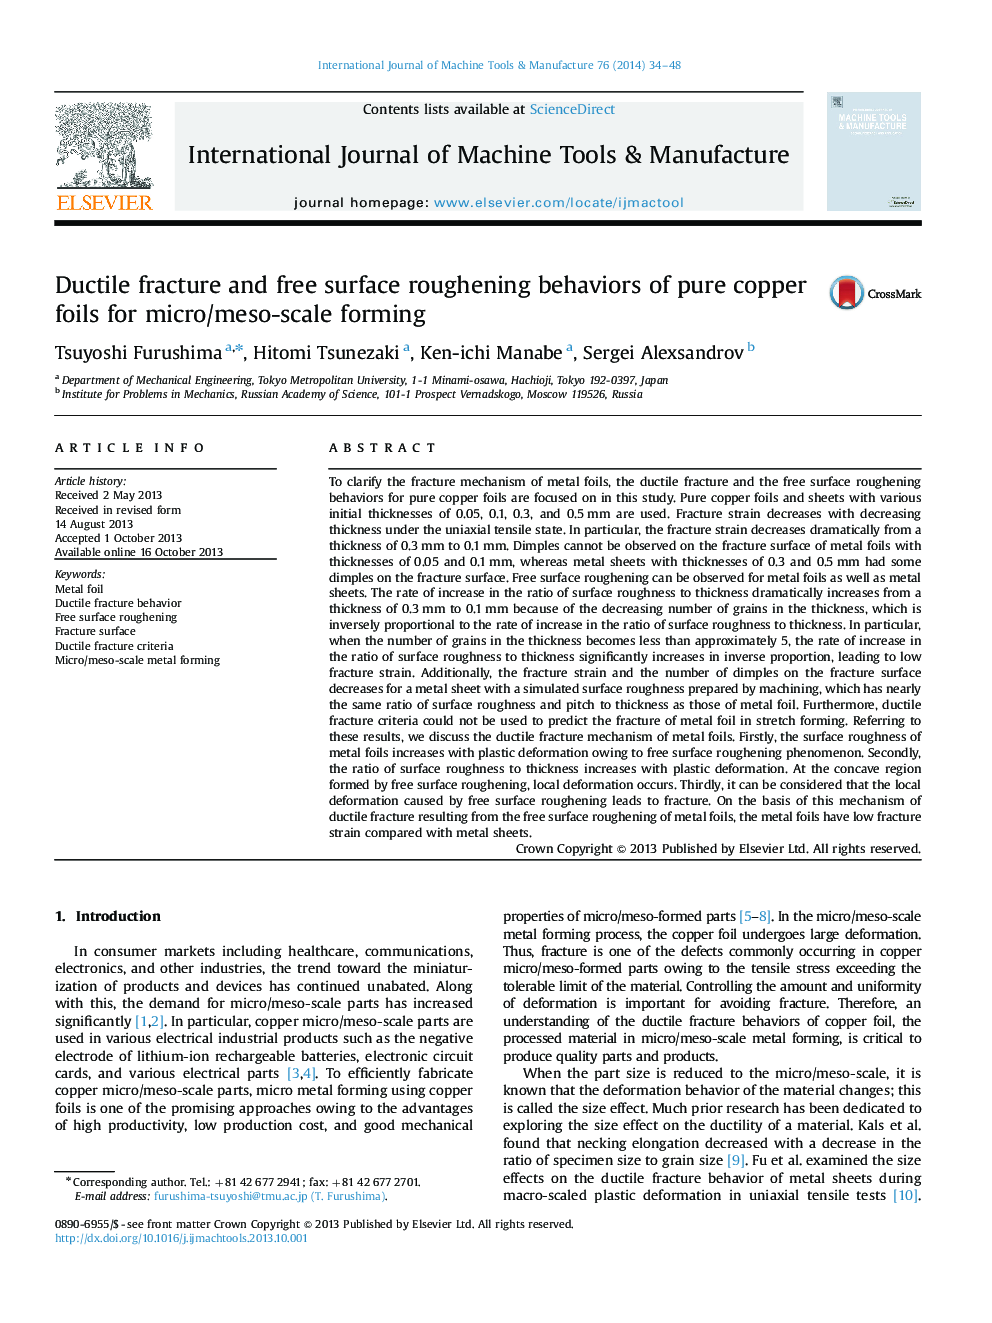 Ductile fracture and free surface roughening behaviors of pure copper foils for micro/meso-scale forming